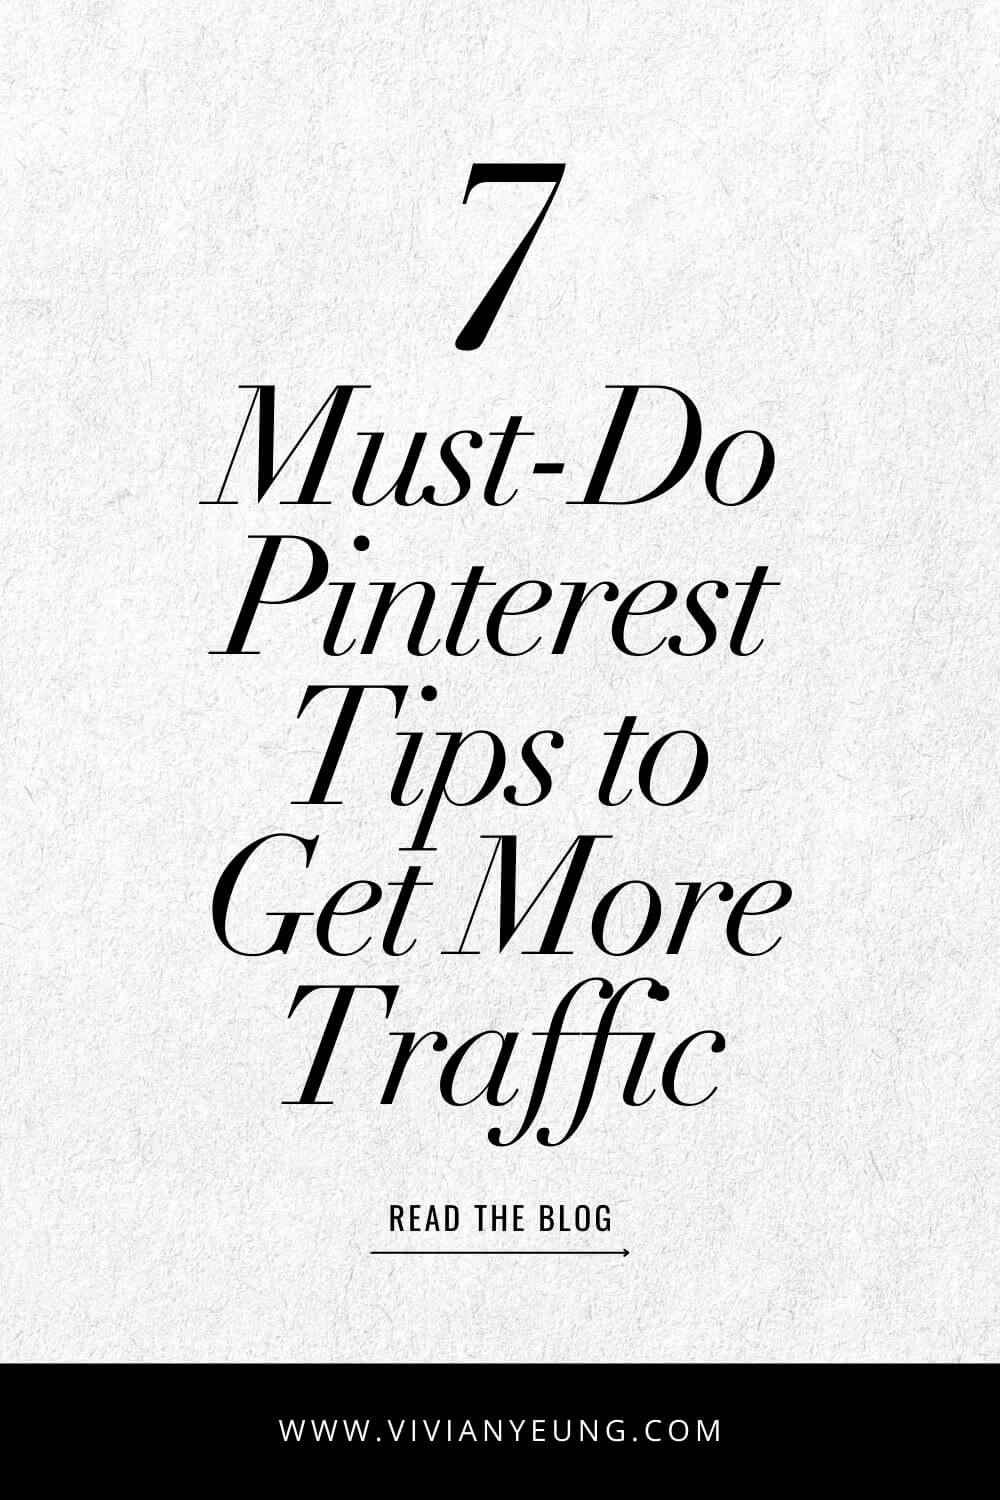 Pinterest Tips to Increase Website Exposure How to Use Pinterest to Get More Traffic